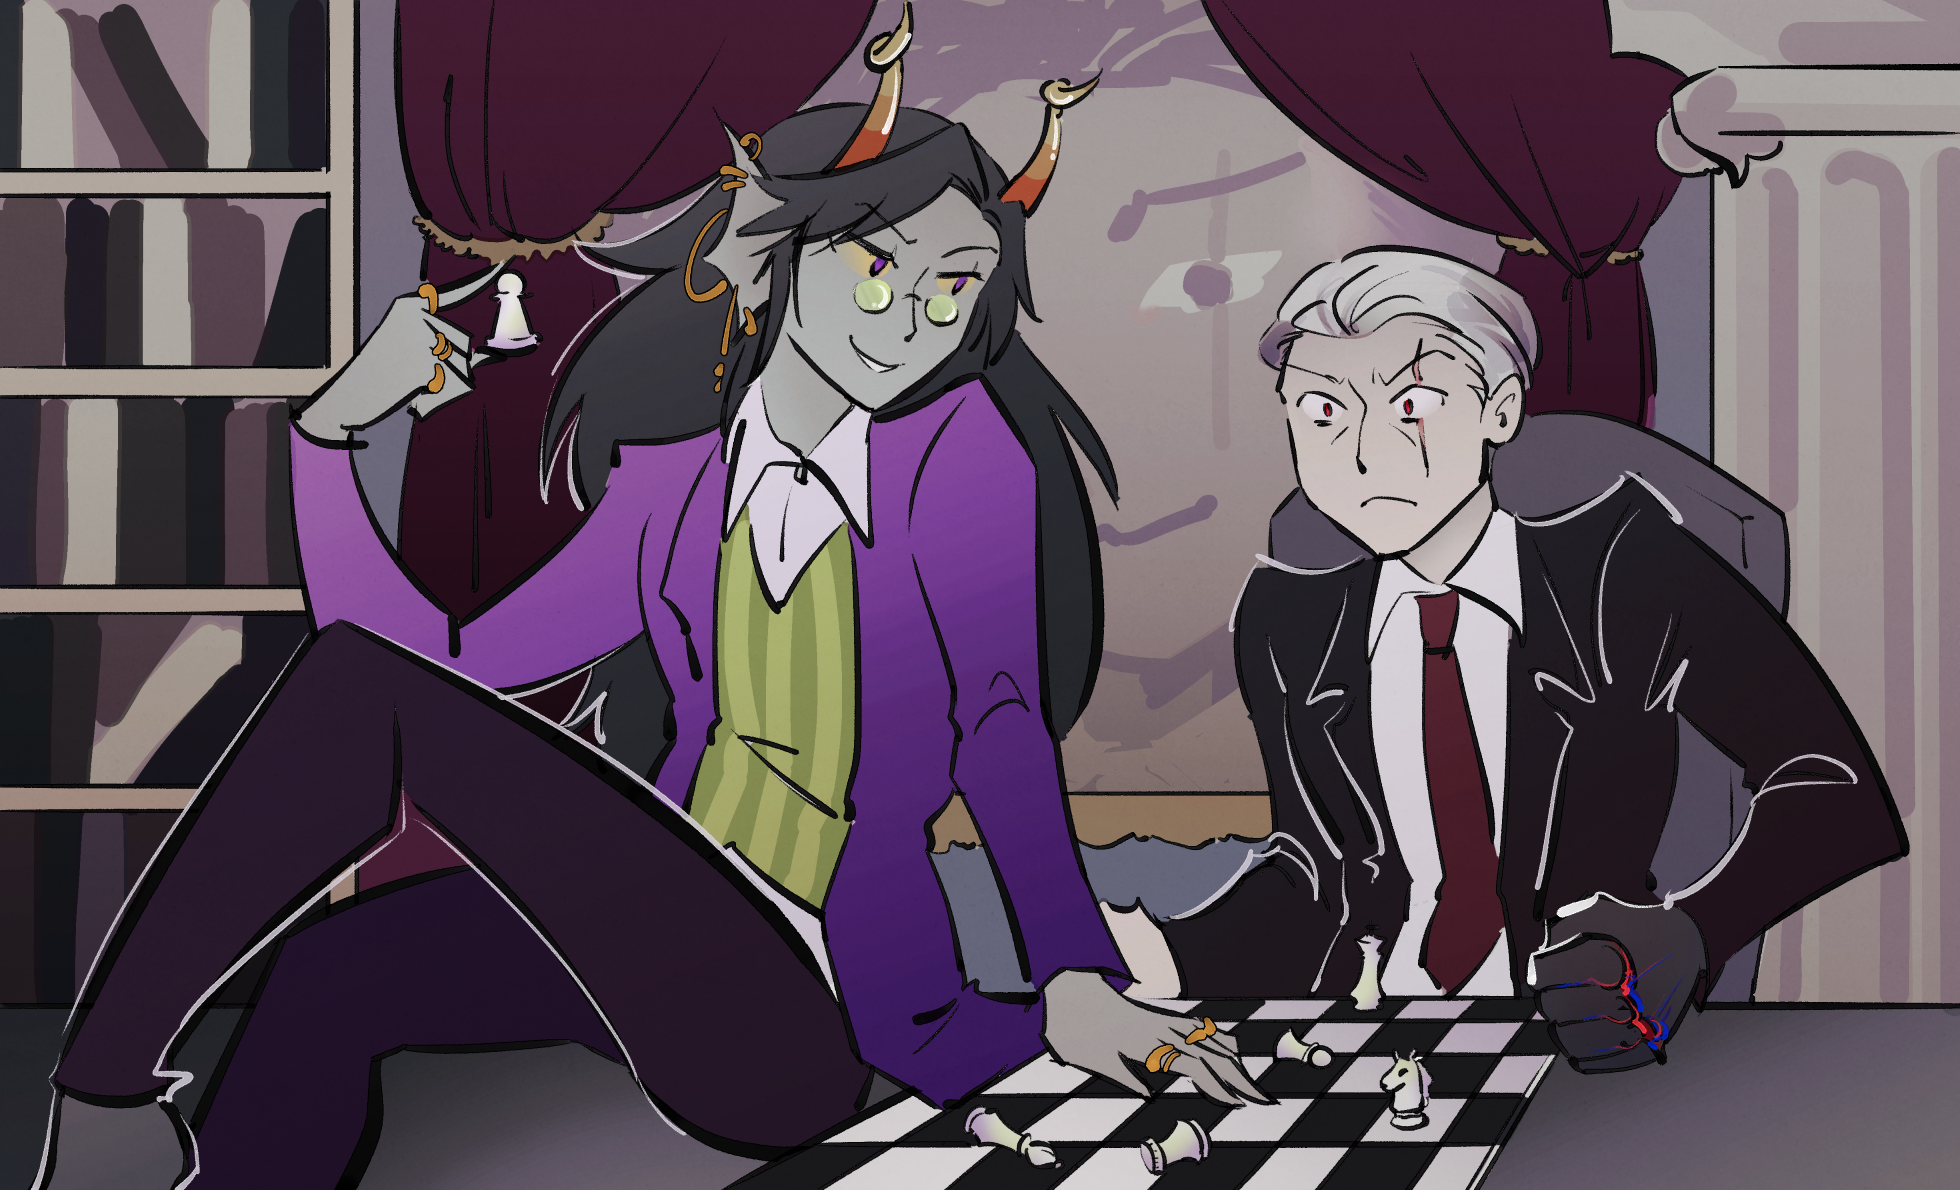 Purple suited troll sitting on old man's desk while old man glares